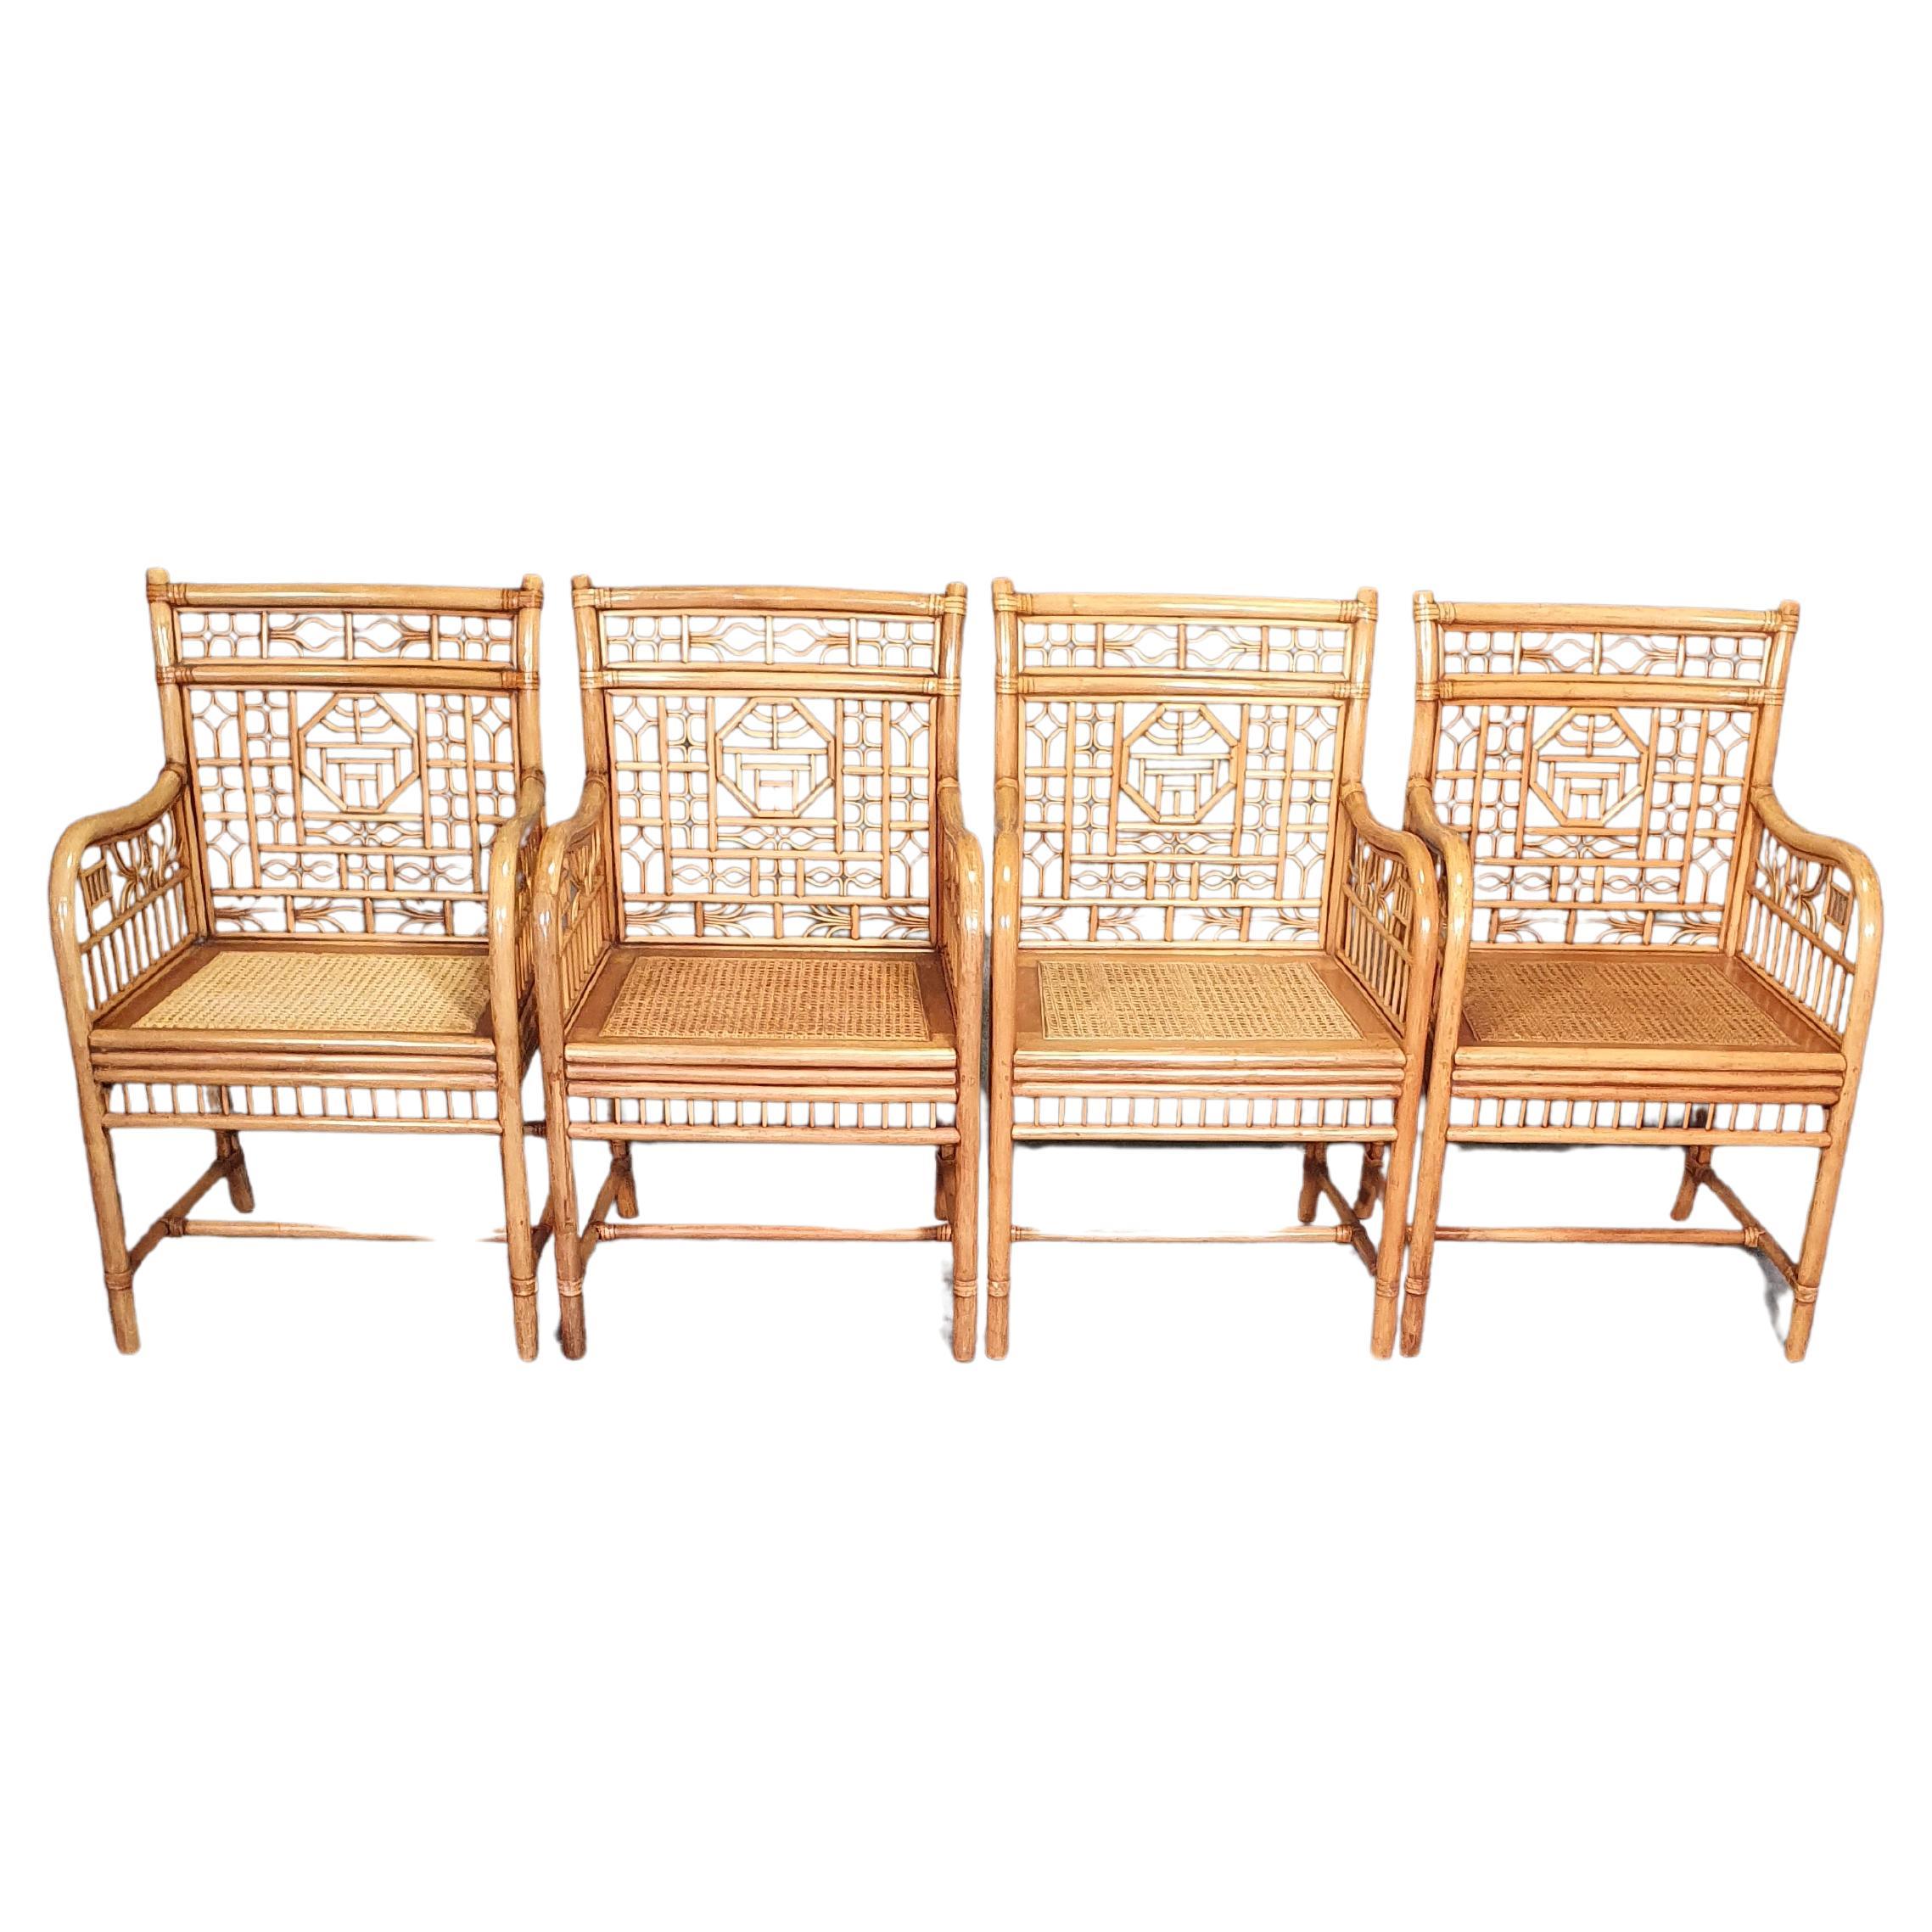 4 x Chaise en rotin Mcguire marquée Chinois / Chinoiserie Chique bamboo